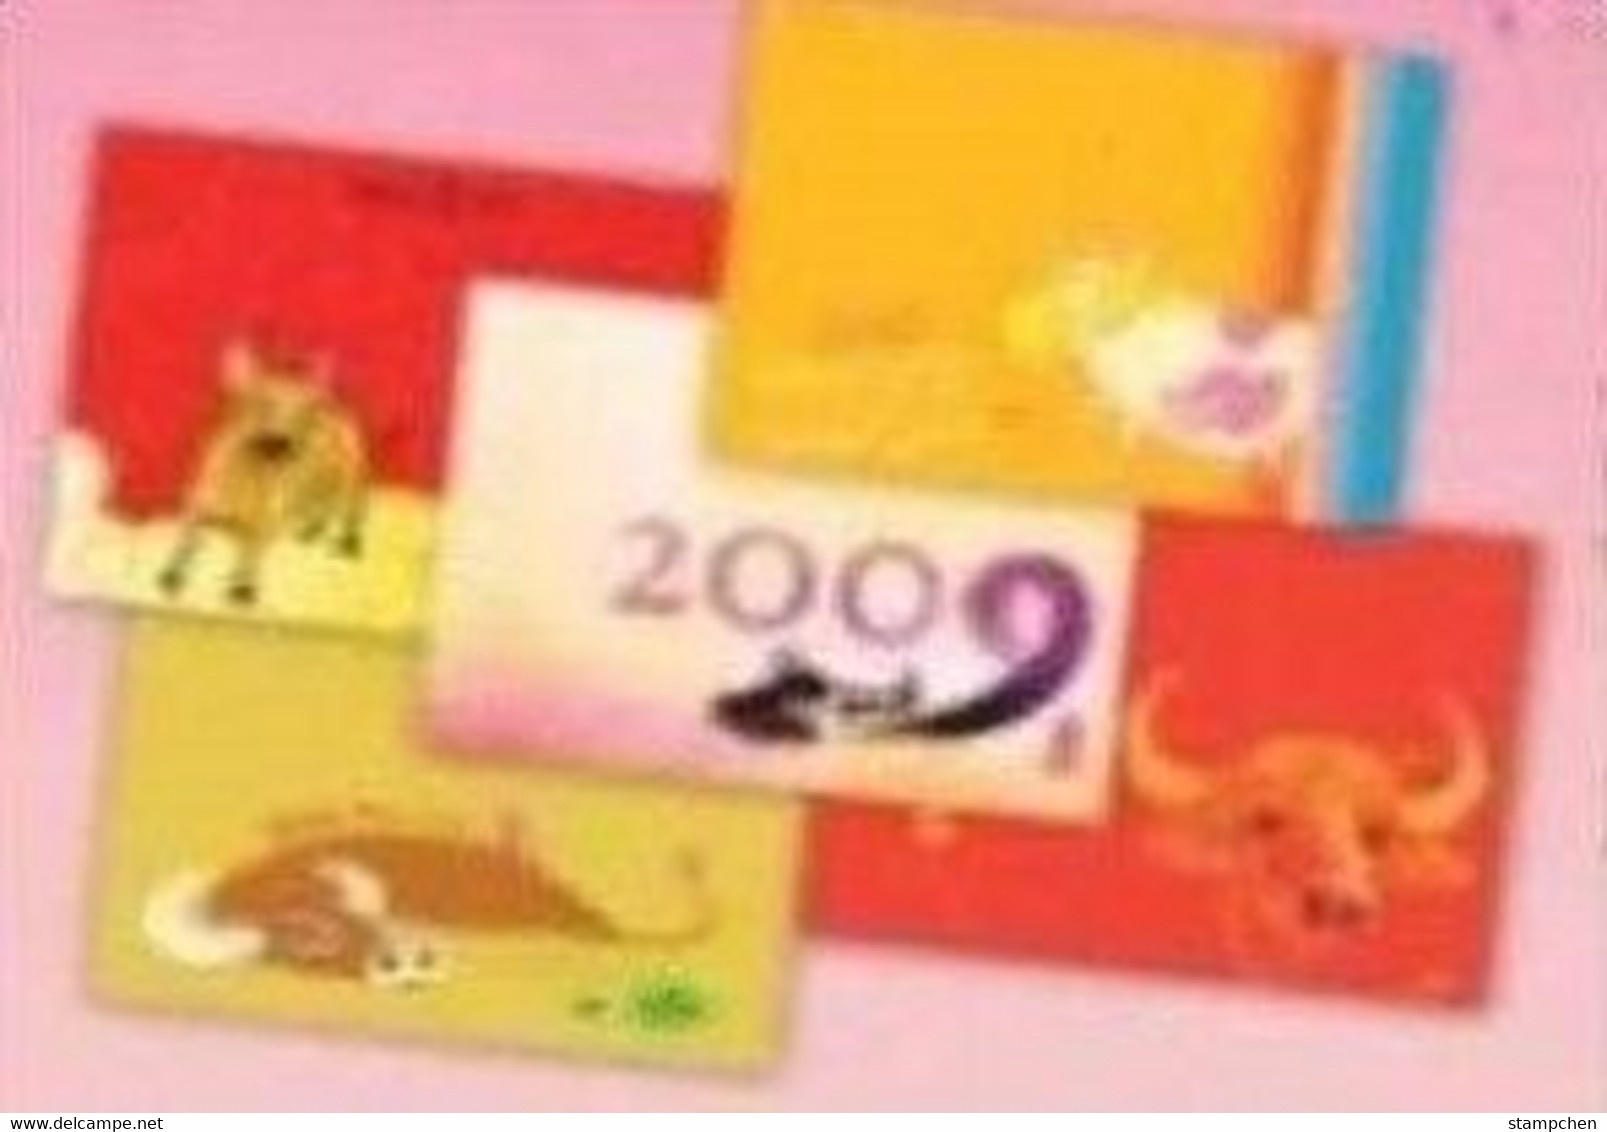 Taiwan Pre-stamp Lottery Postal Cards Of 2008 Chinese New Year Zodiac - Ox Cow Cattle Postal Stationary 2009 - Covers & Documents